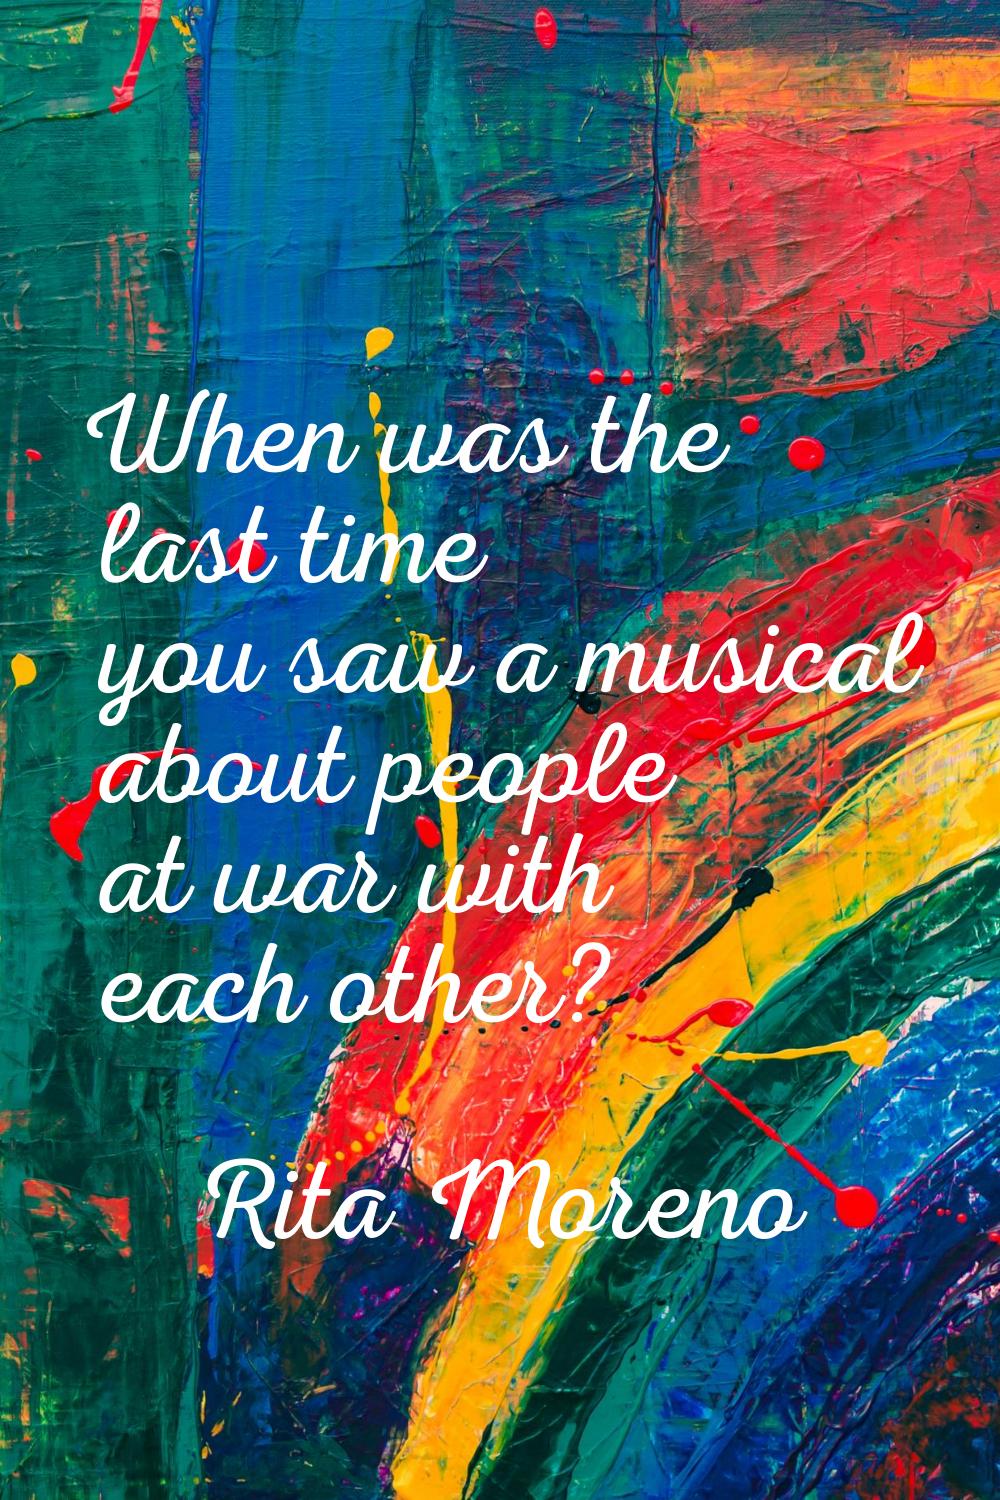 When was the last time you saw a musical about people at war with each other?